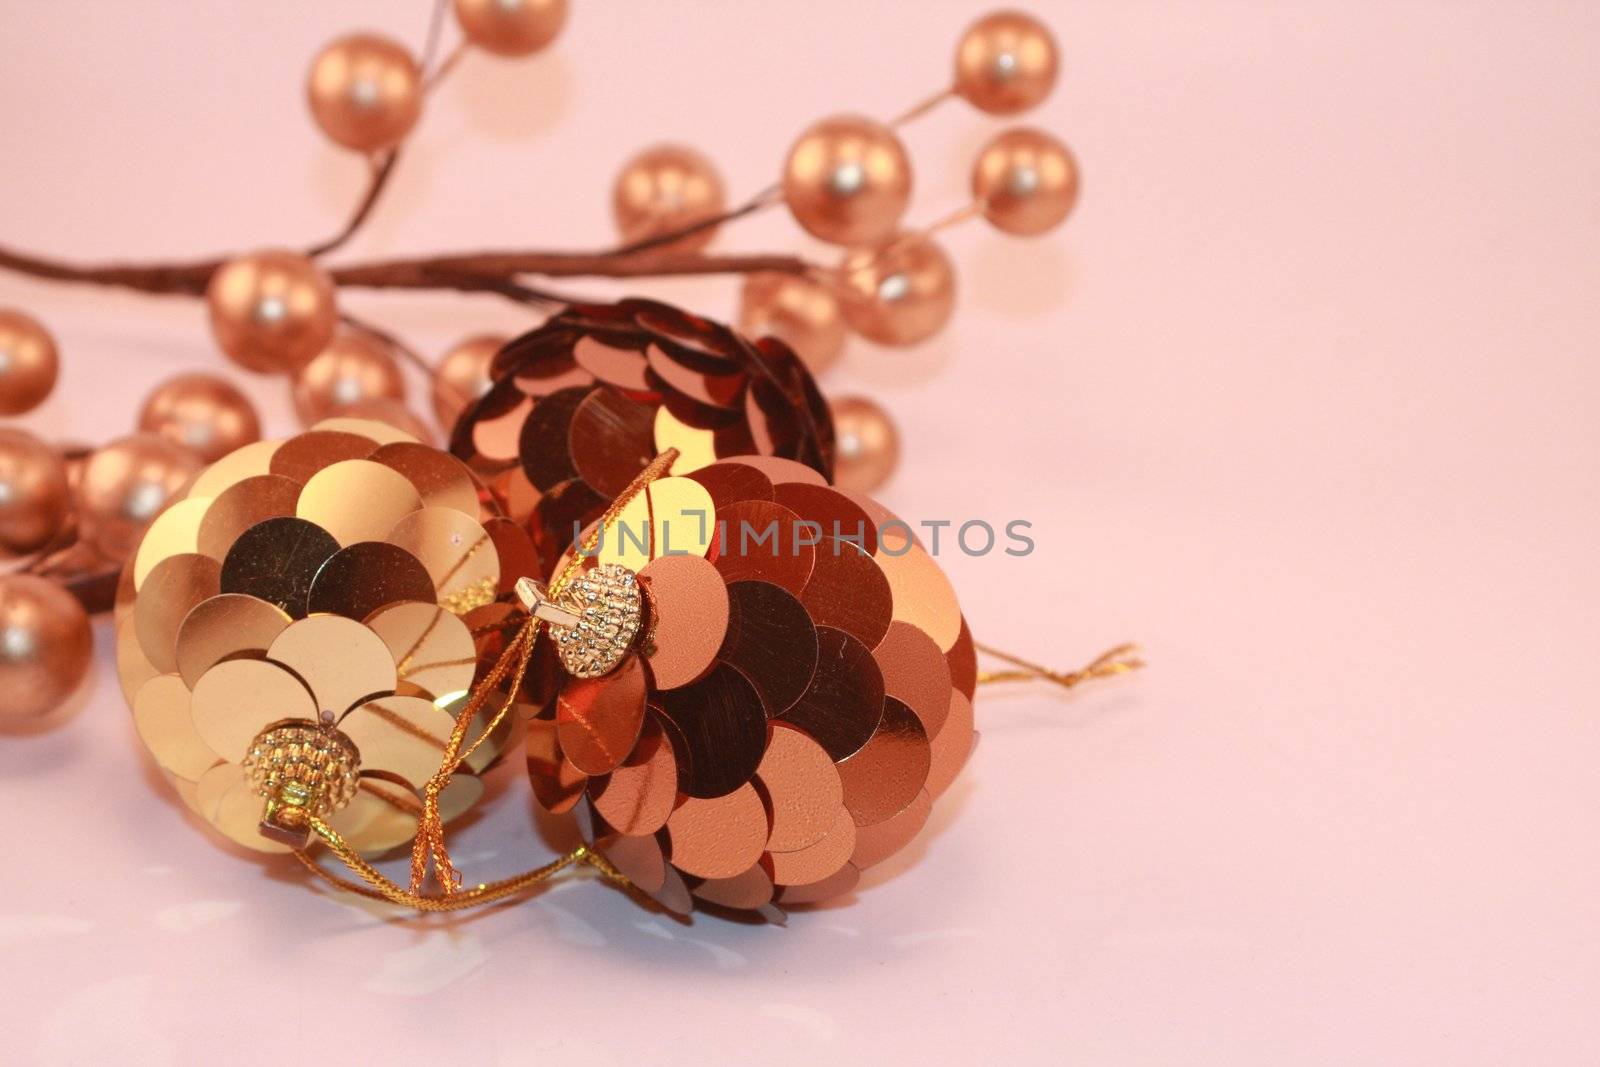 Metallic Gold and Bronze Christmas Ornaments with Berries by knktucker